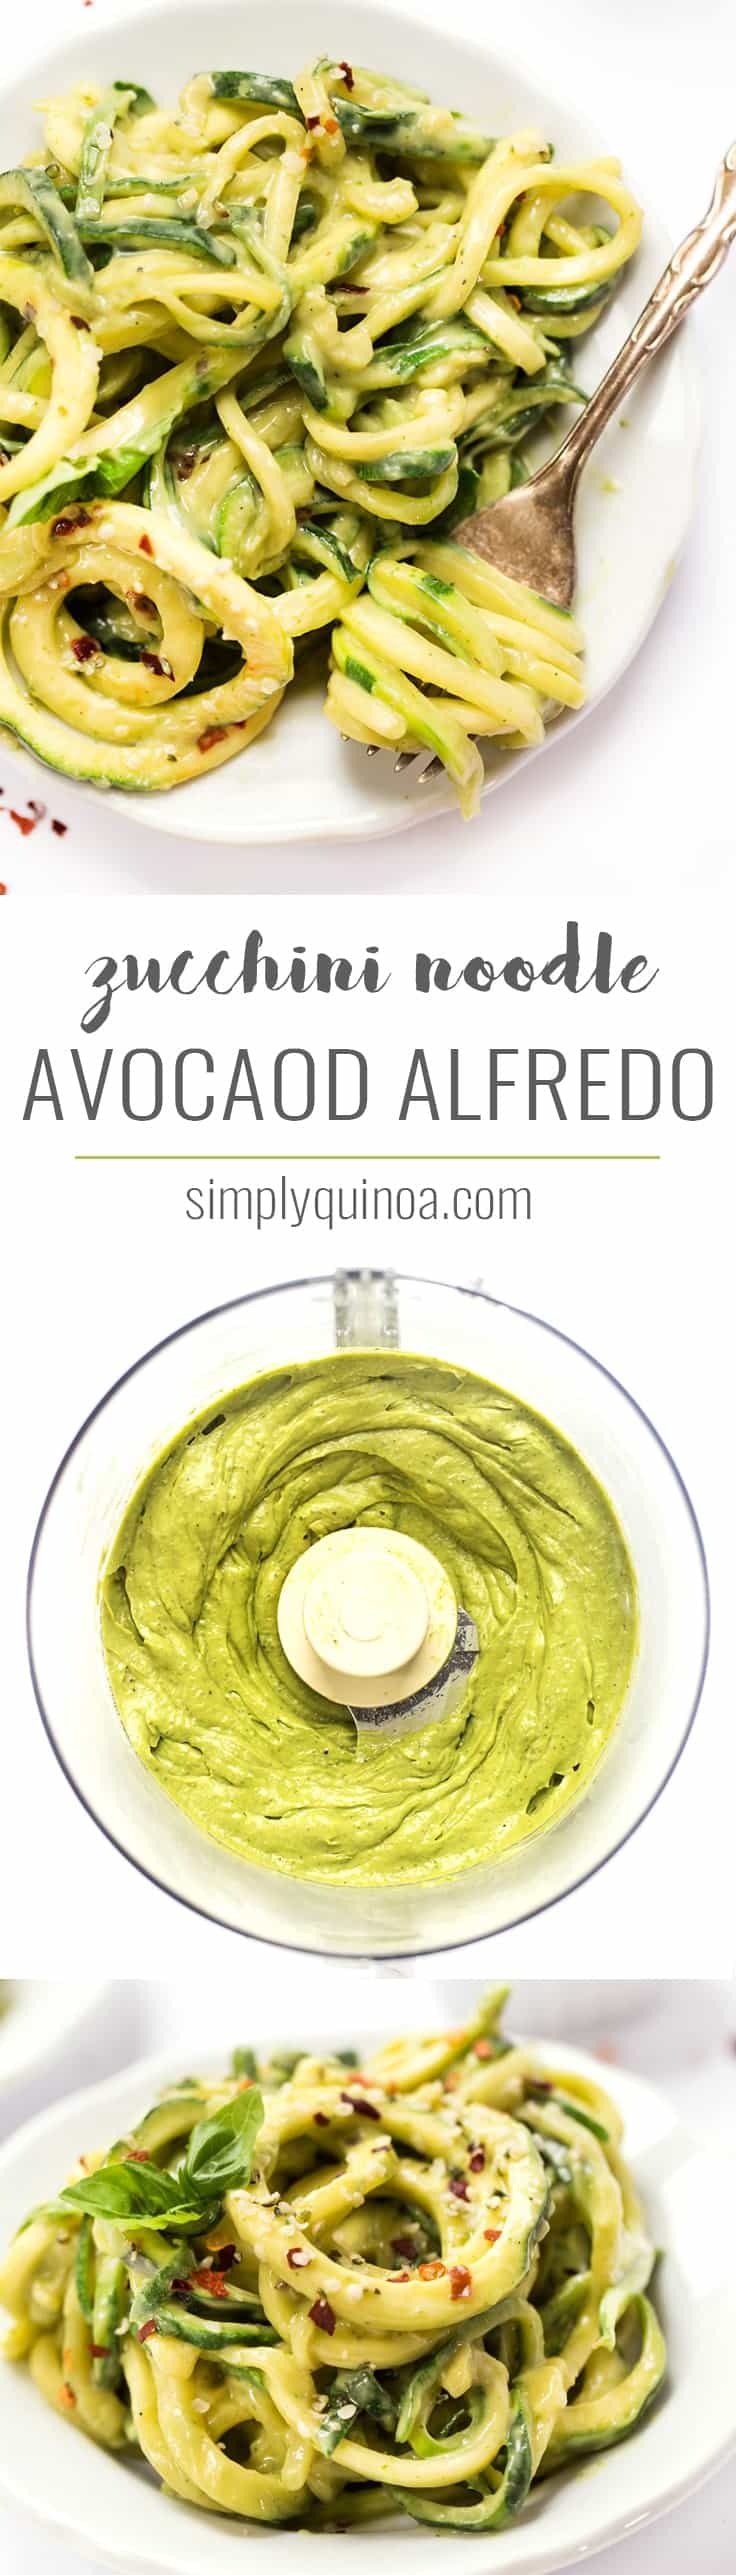 This easy AVOCADO ALFREDO is a twist on the classic but doesn't use any dairy. To lighten things up even more we're using zucchini noodles instead of pasta!